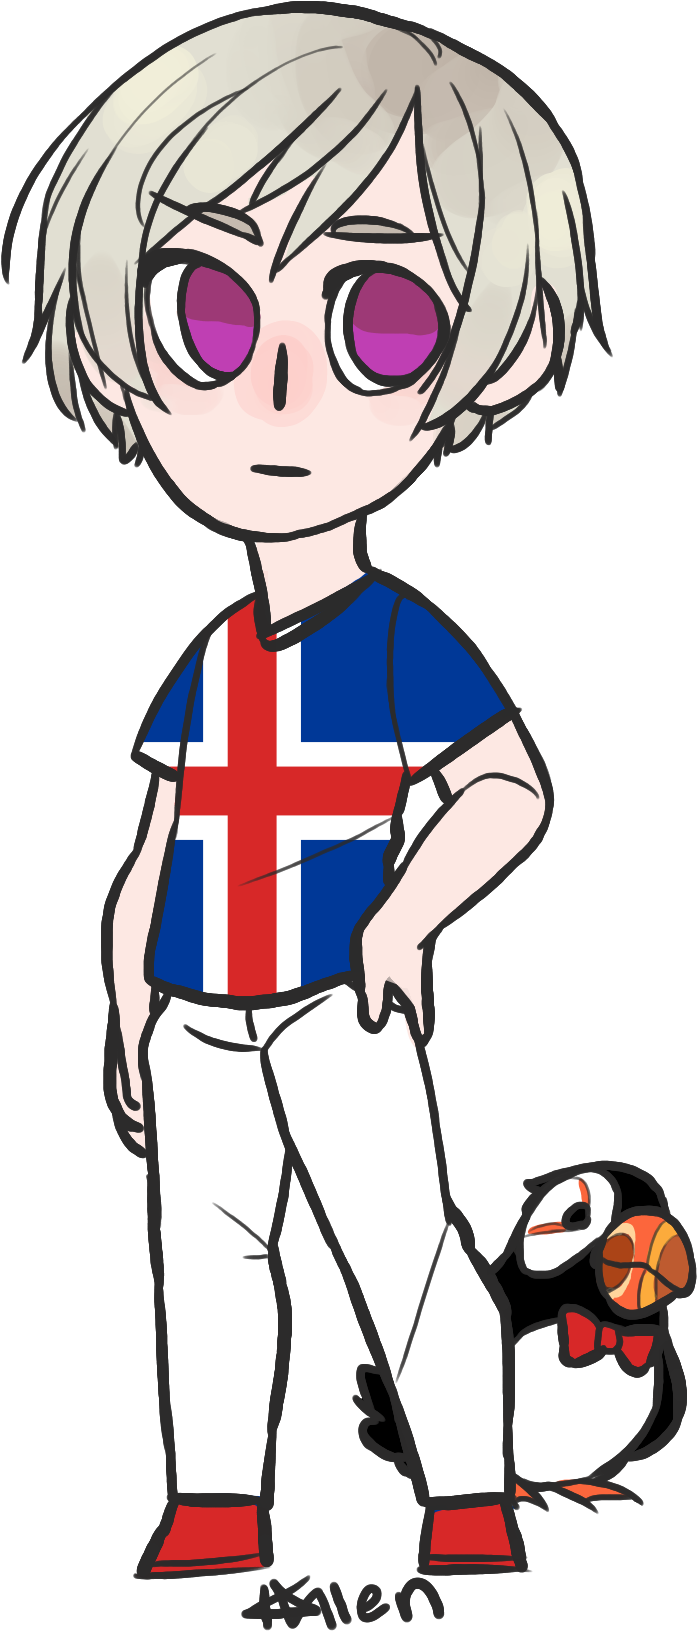 Aph Iceland - Iceland (1100x1920)